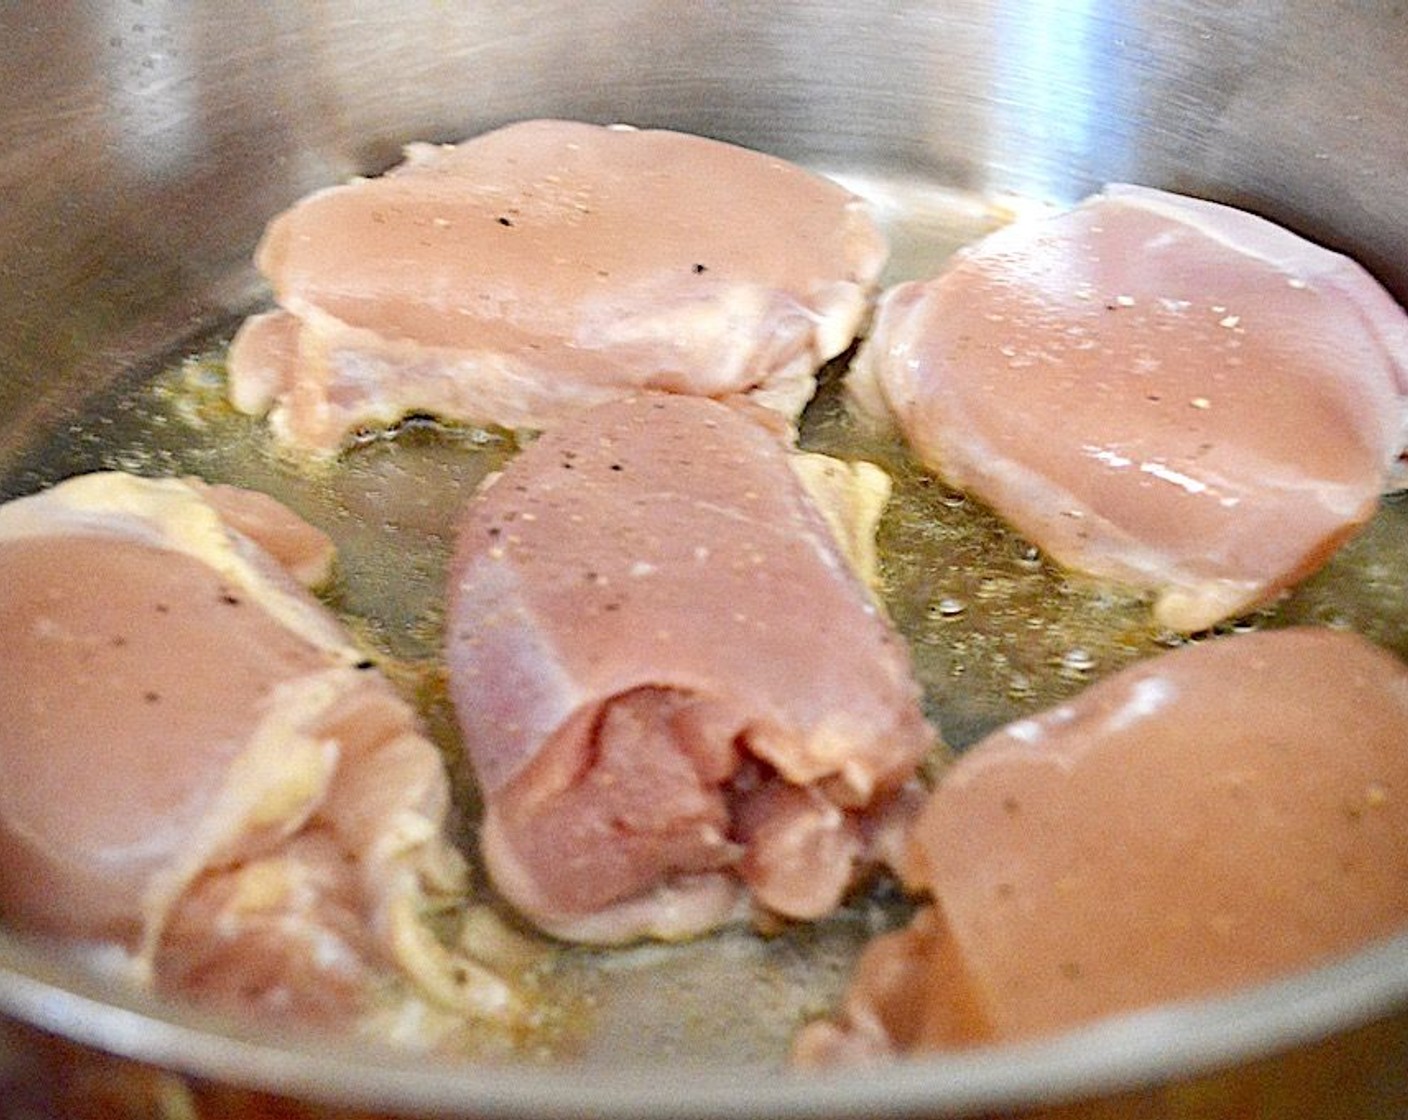 step 2 Heat the Olive Oil (1 dash) in the skillet over medium high heat. While it heats up, generously season the Boneless, Skinless Chicken Thighs (5) on both sides with the Salt (2 pinches), Ground Black Pepper (2 pinches) and McCormick® Garlic Powder (2 pinches). Then brown the chicken for 4 minutes on each side in the skillet and transfer to a plate.